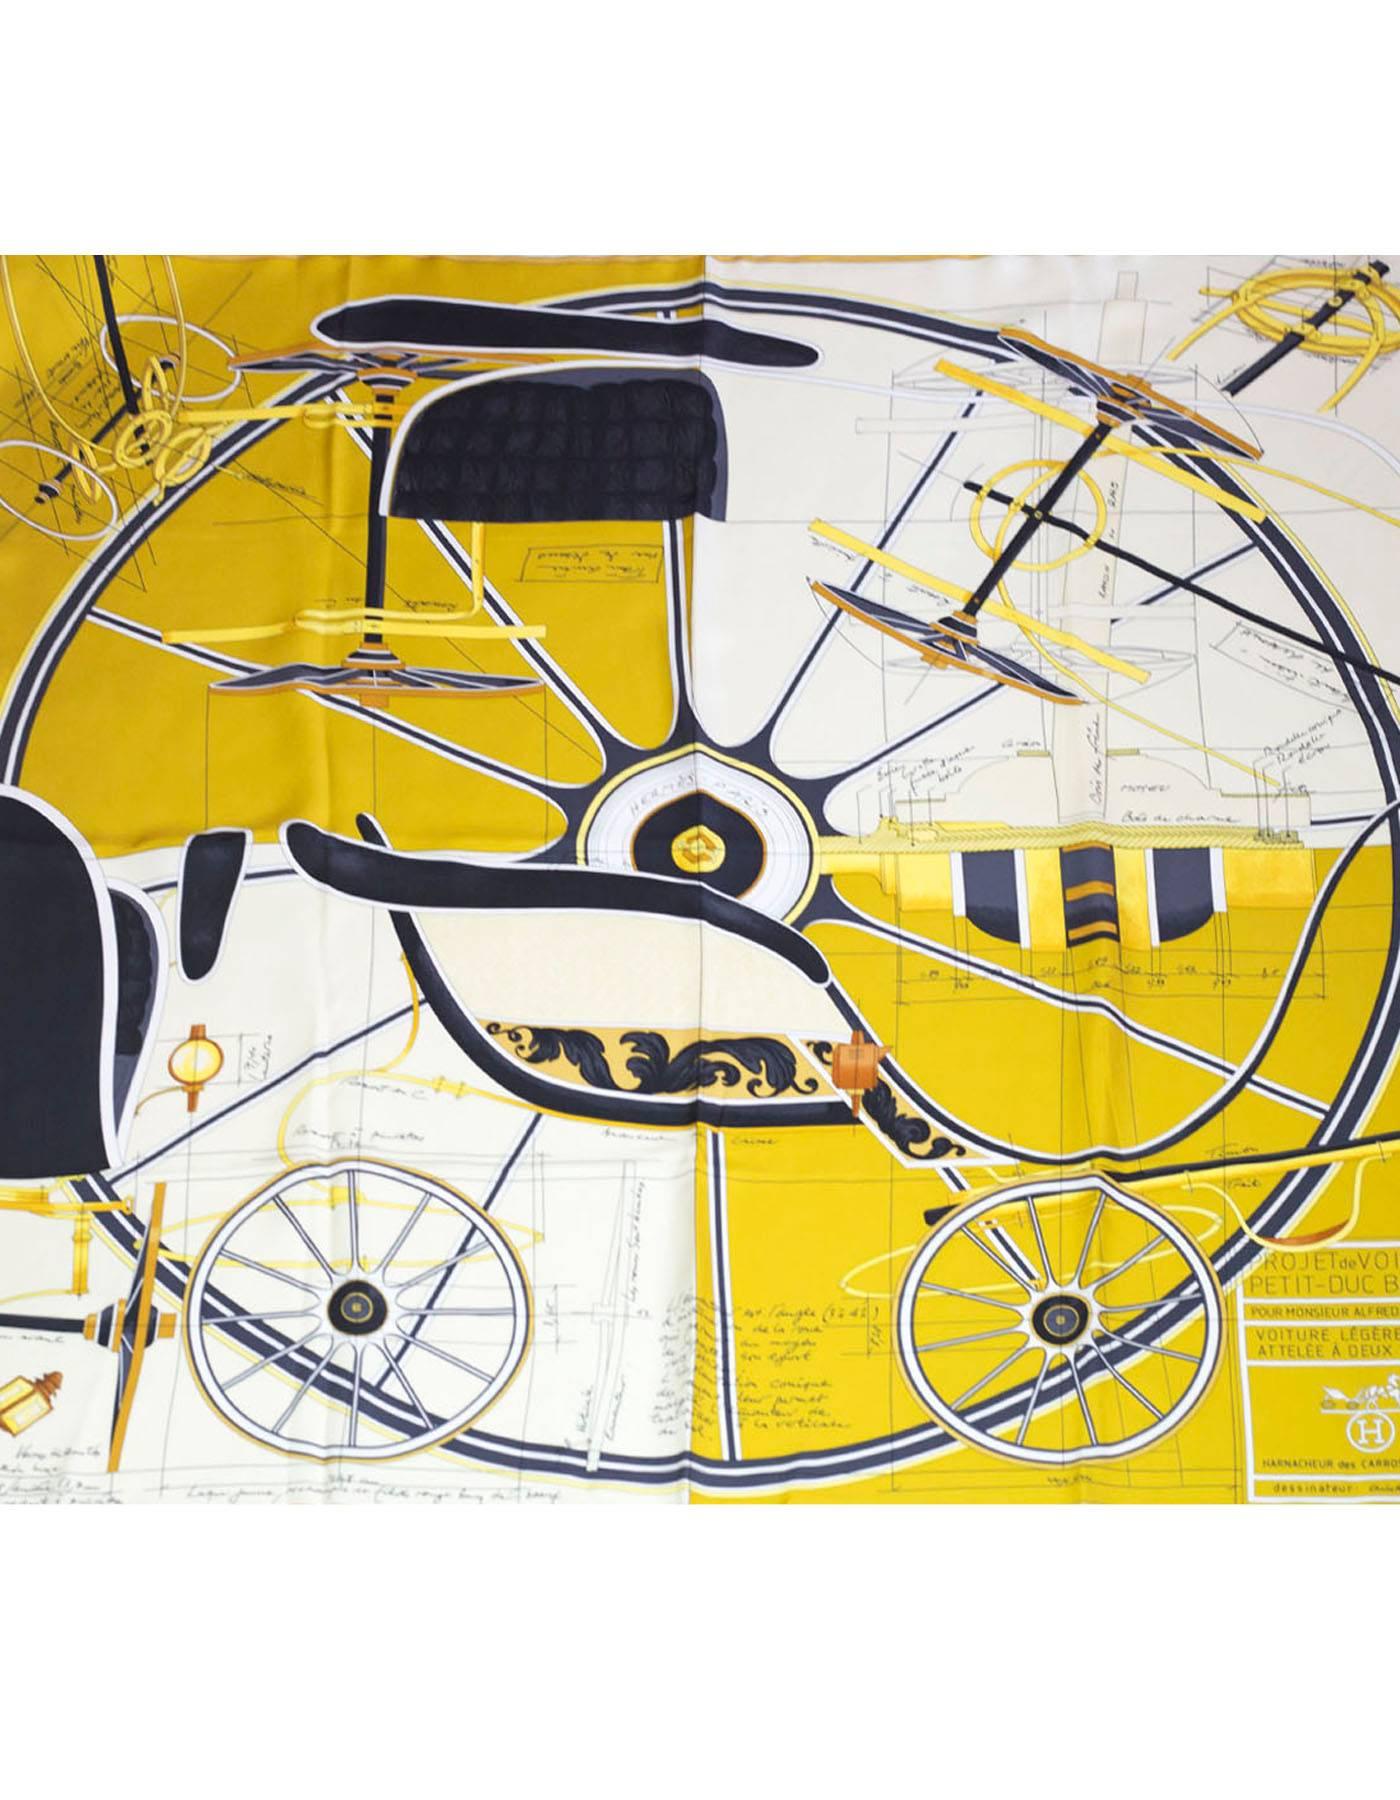 Hermes Project de Voiture Petit-Duc Bateau 90cm Silk Scarf
Features script and wheels printed throughout

Made In: France
Color: Black, white, grey and yellow
Composition: 100% silk
Retail Price: $395 + tax
Overall Condition: Excellent pre-owned